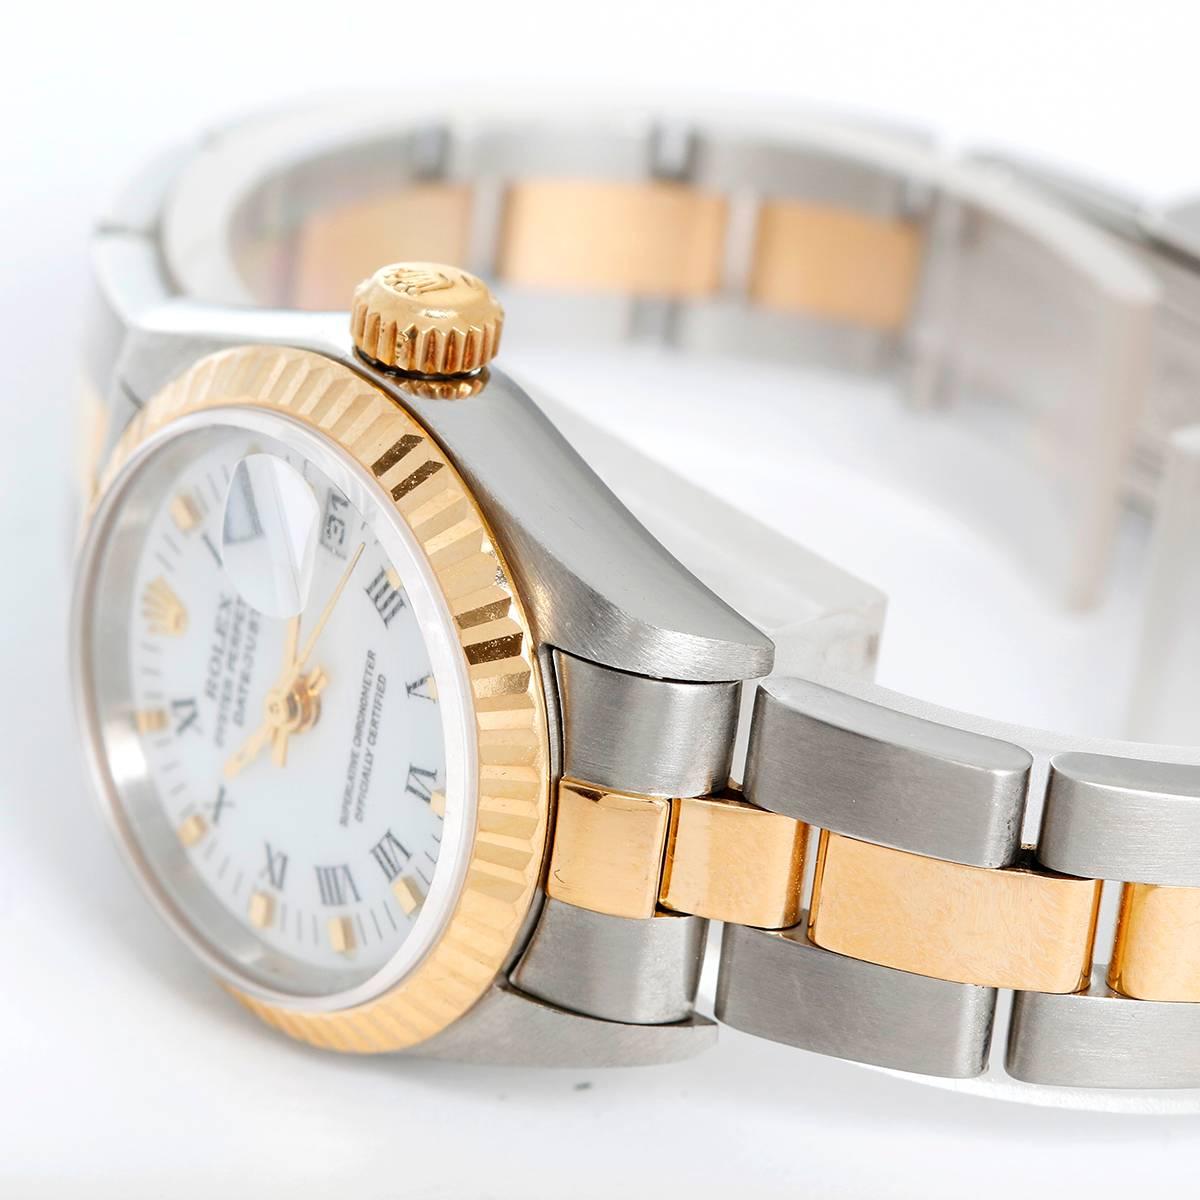 Automatic winding, Quickset, 31 jewels, sapphire crystal. Stainless steel case with 18k yellow gold fluted bezel  (26mm diameter). White dial with black Roman numerals and gold markers. Stainless steel and 18k yellow gold Oyster bracelet. Pre-owned